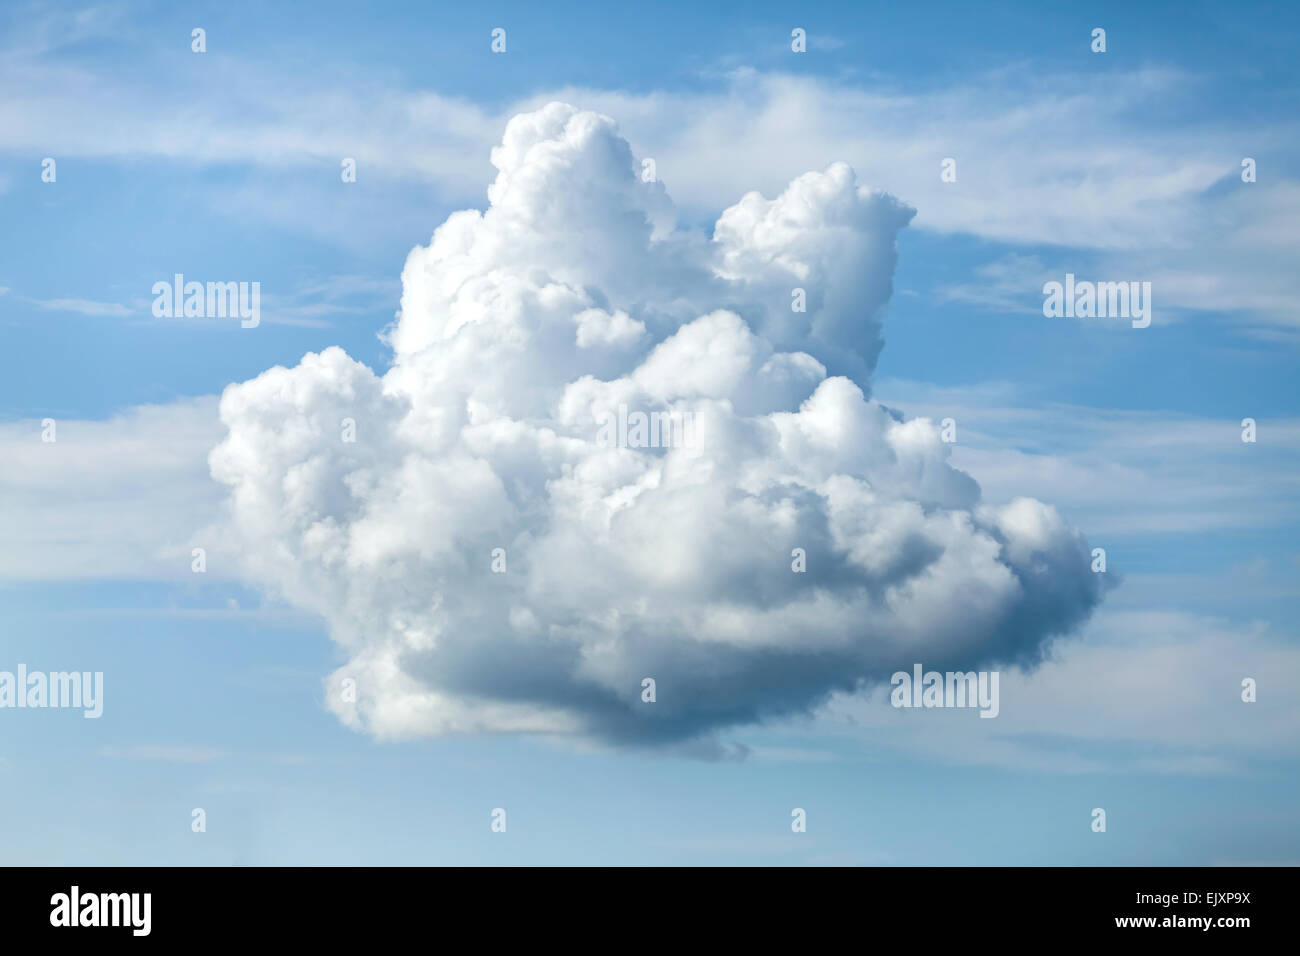 Unusual shaped cloud against the blue sky. Stock Photo